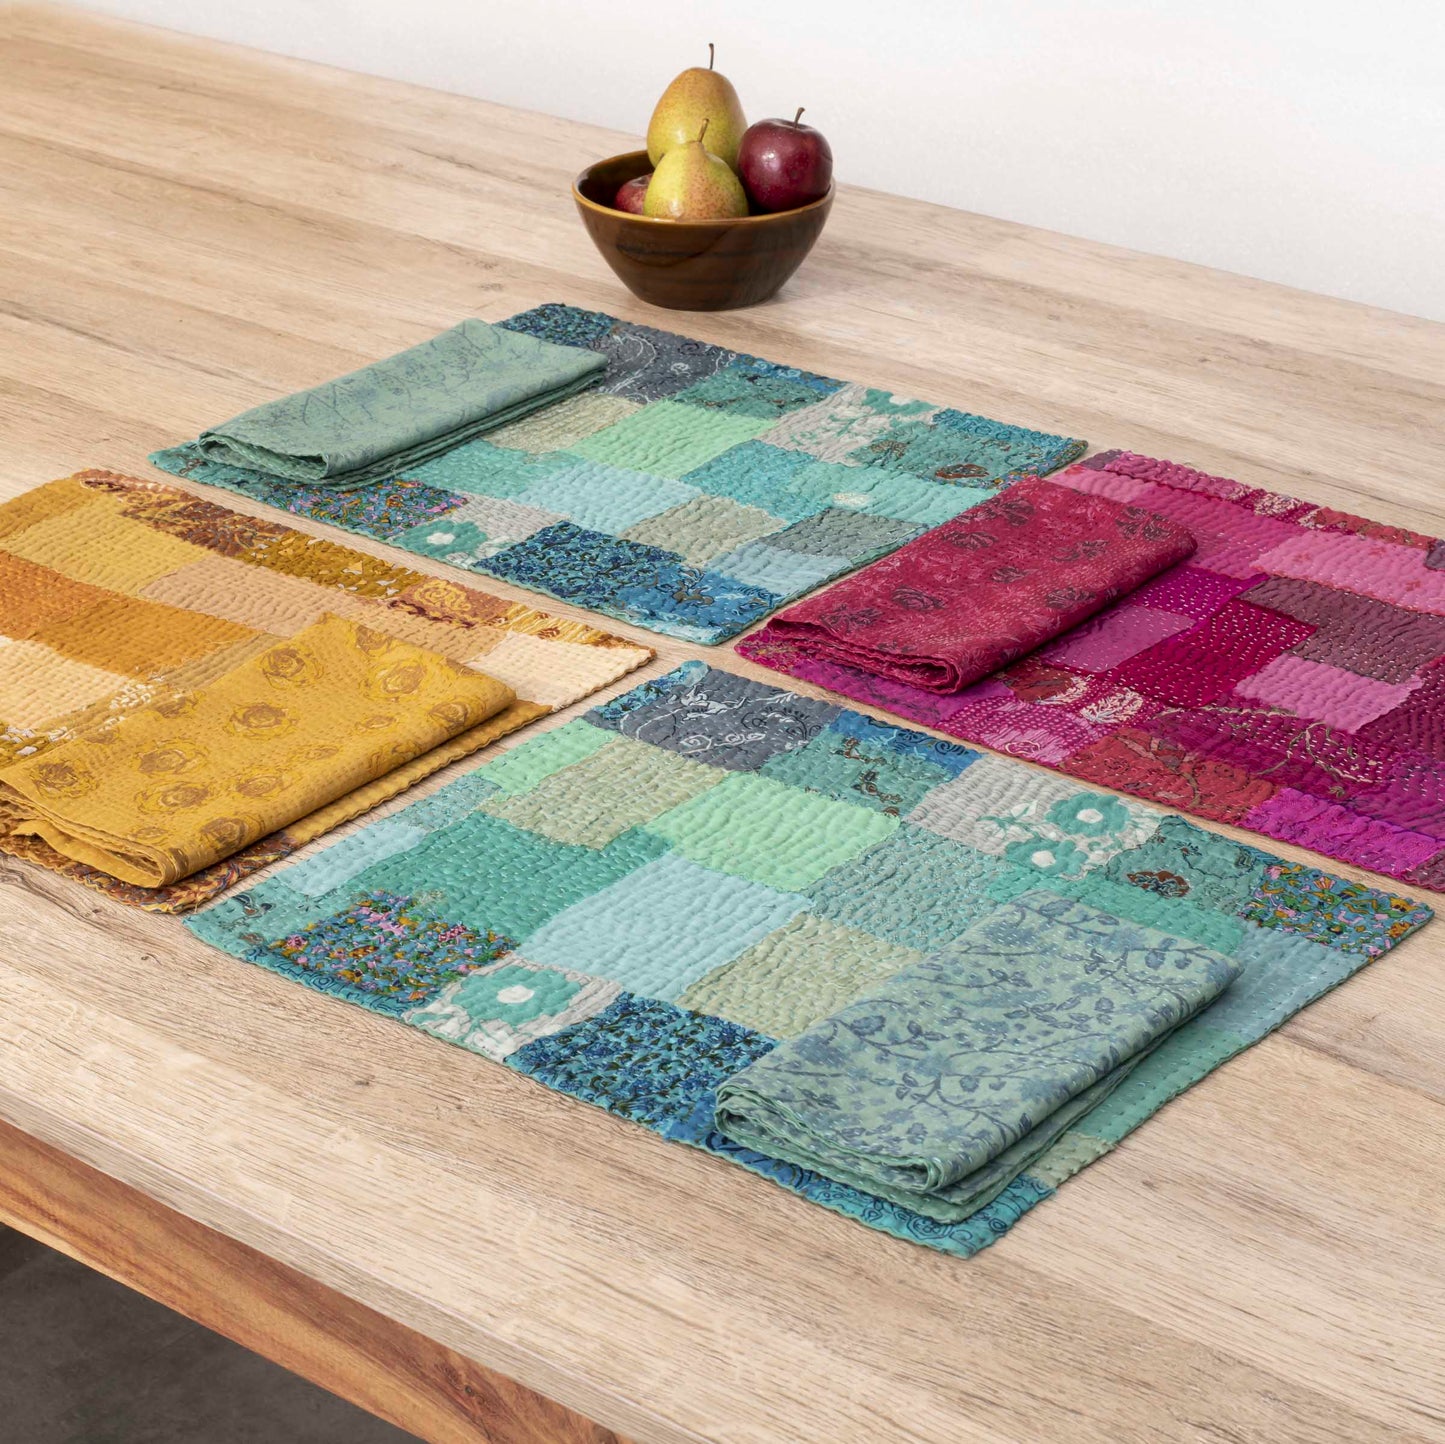 Printed Fray Handmade Placemats - Golden (Set of 2)